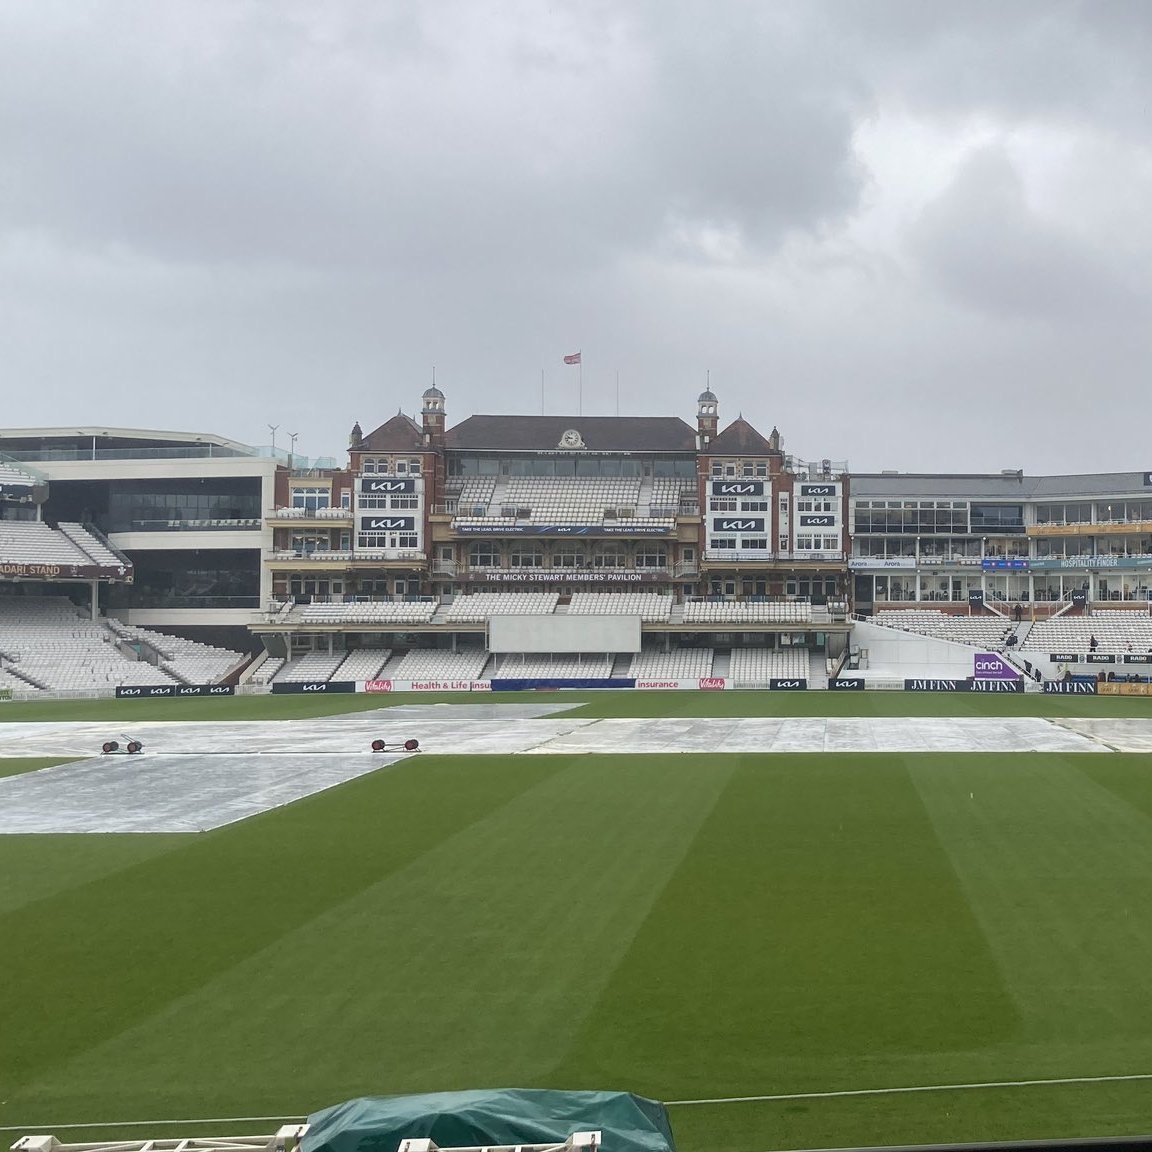 Good morning from the Kia Oval! 🌧

The current scene is grey skies and rain here in London ☔️

The forecast is looking slightly better post midday but there are still showers around, updates as we get them

#SURvSOM
#WeAreSomerset